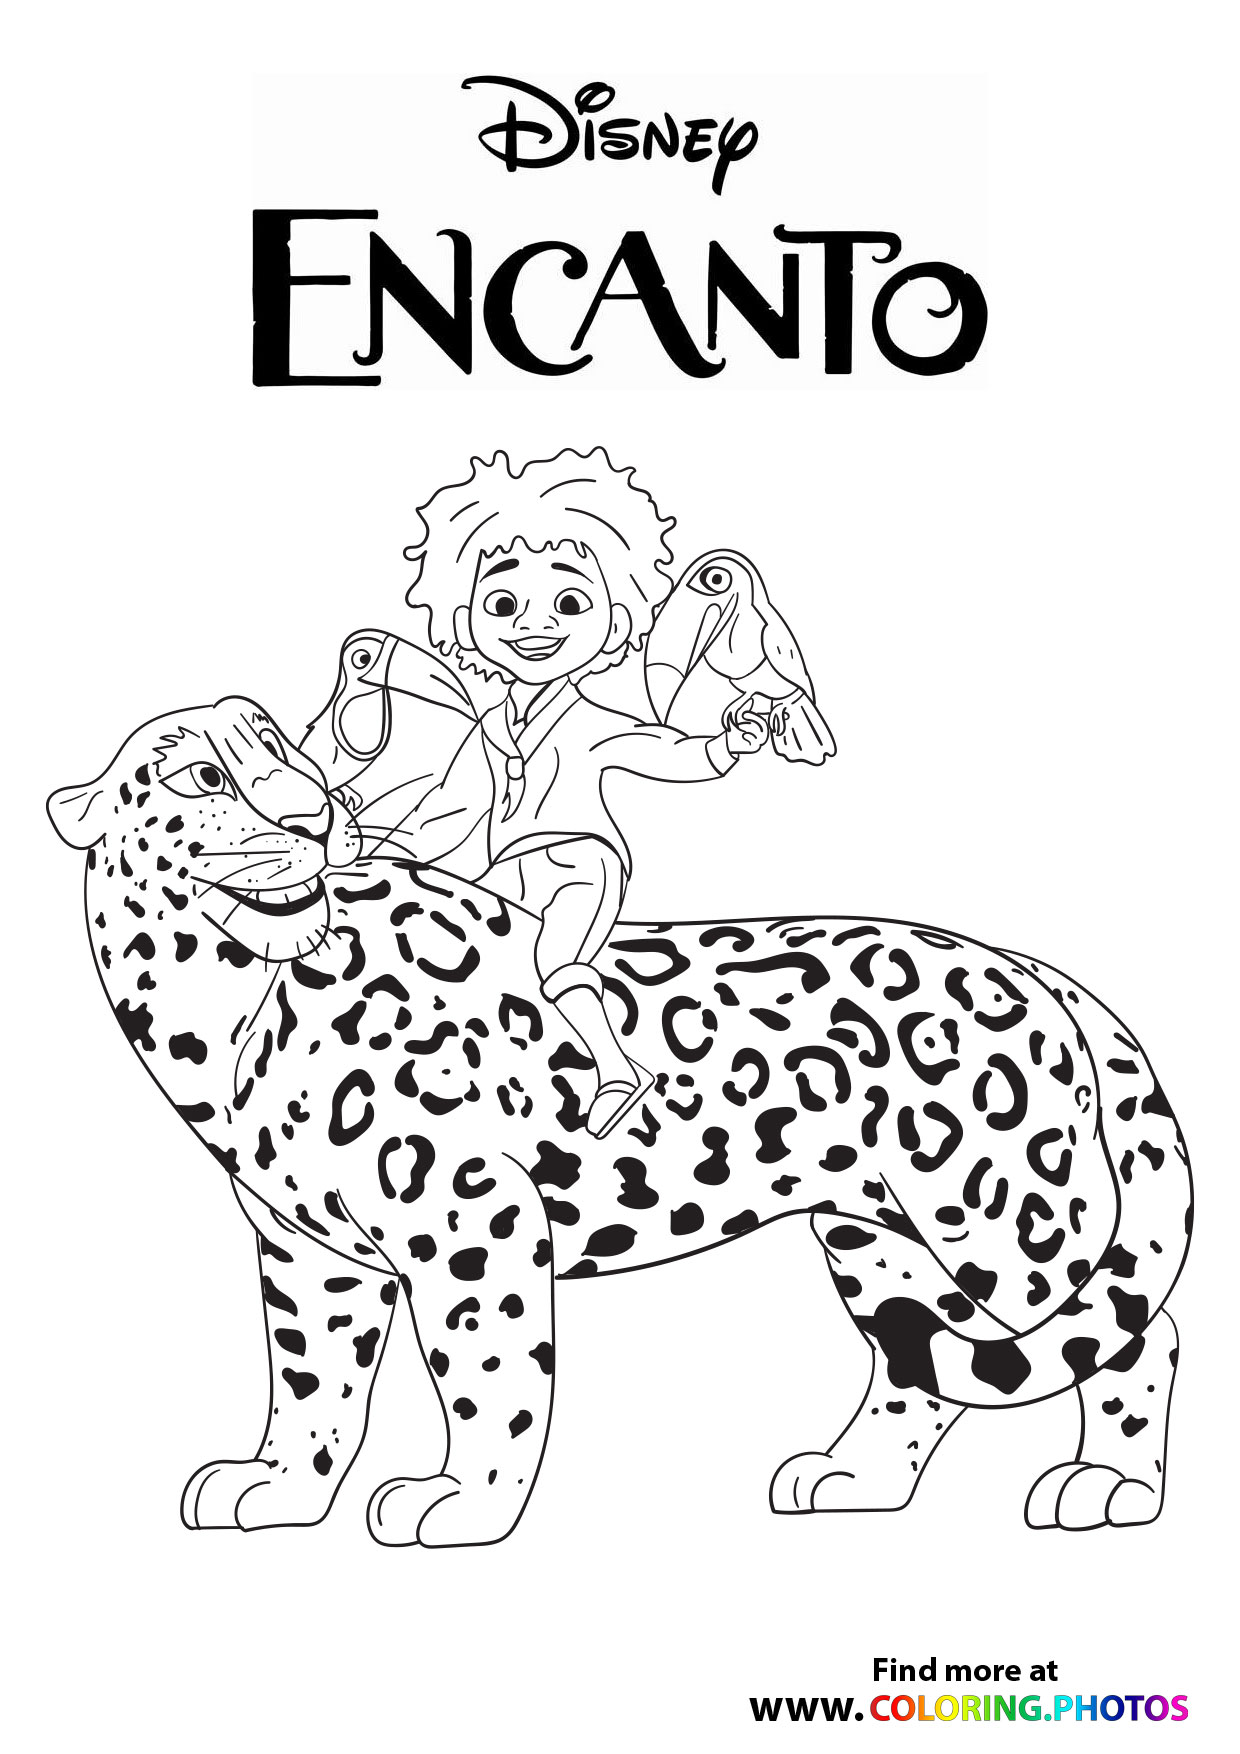 Disney Encanto Coloring Pages for kids   Free coloring pages for print out